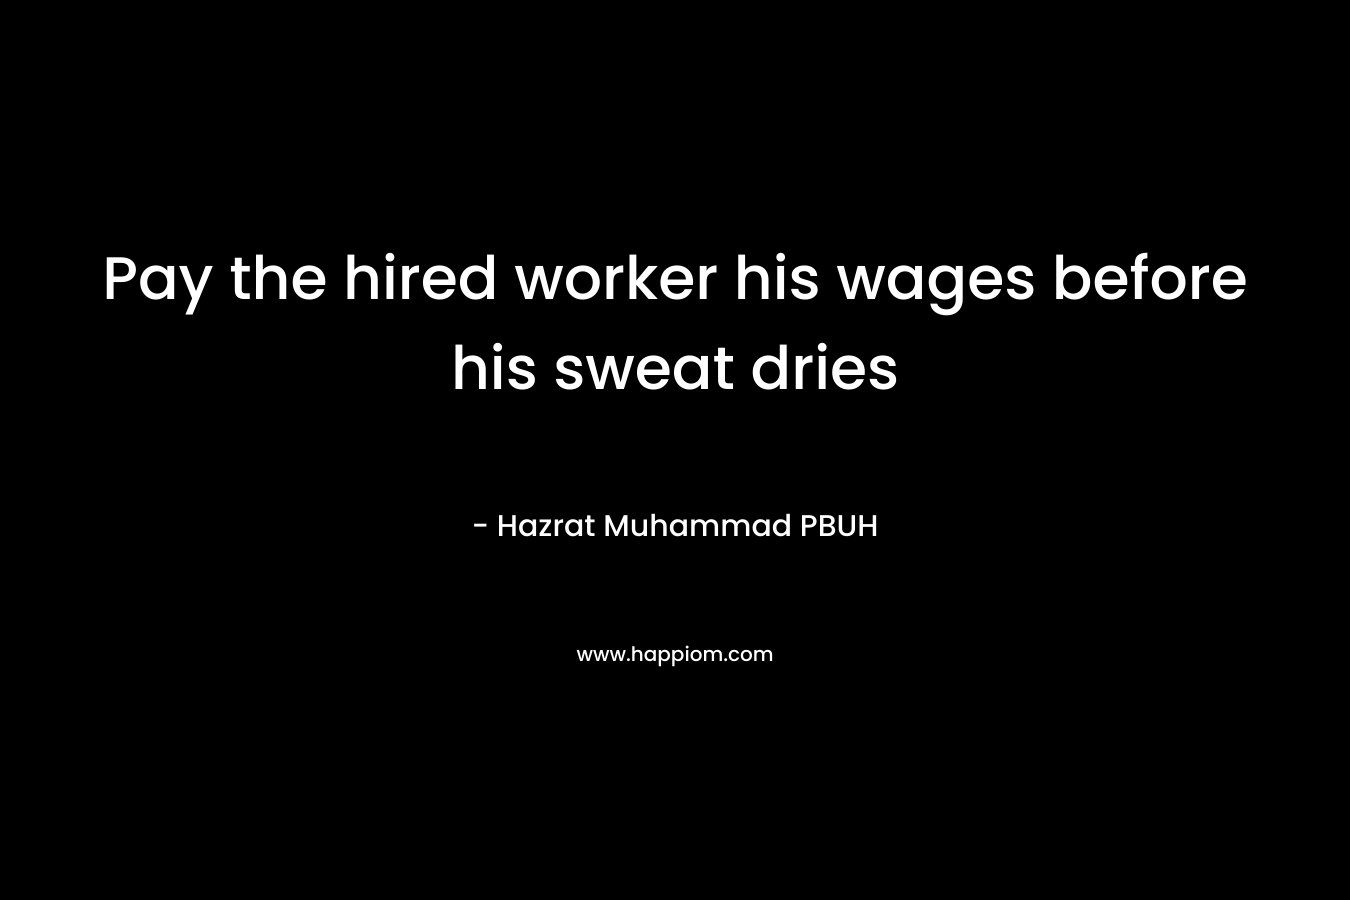 Pay the hired worker his wages before his sweat dries